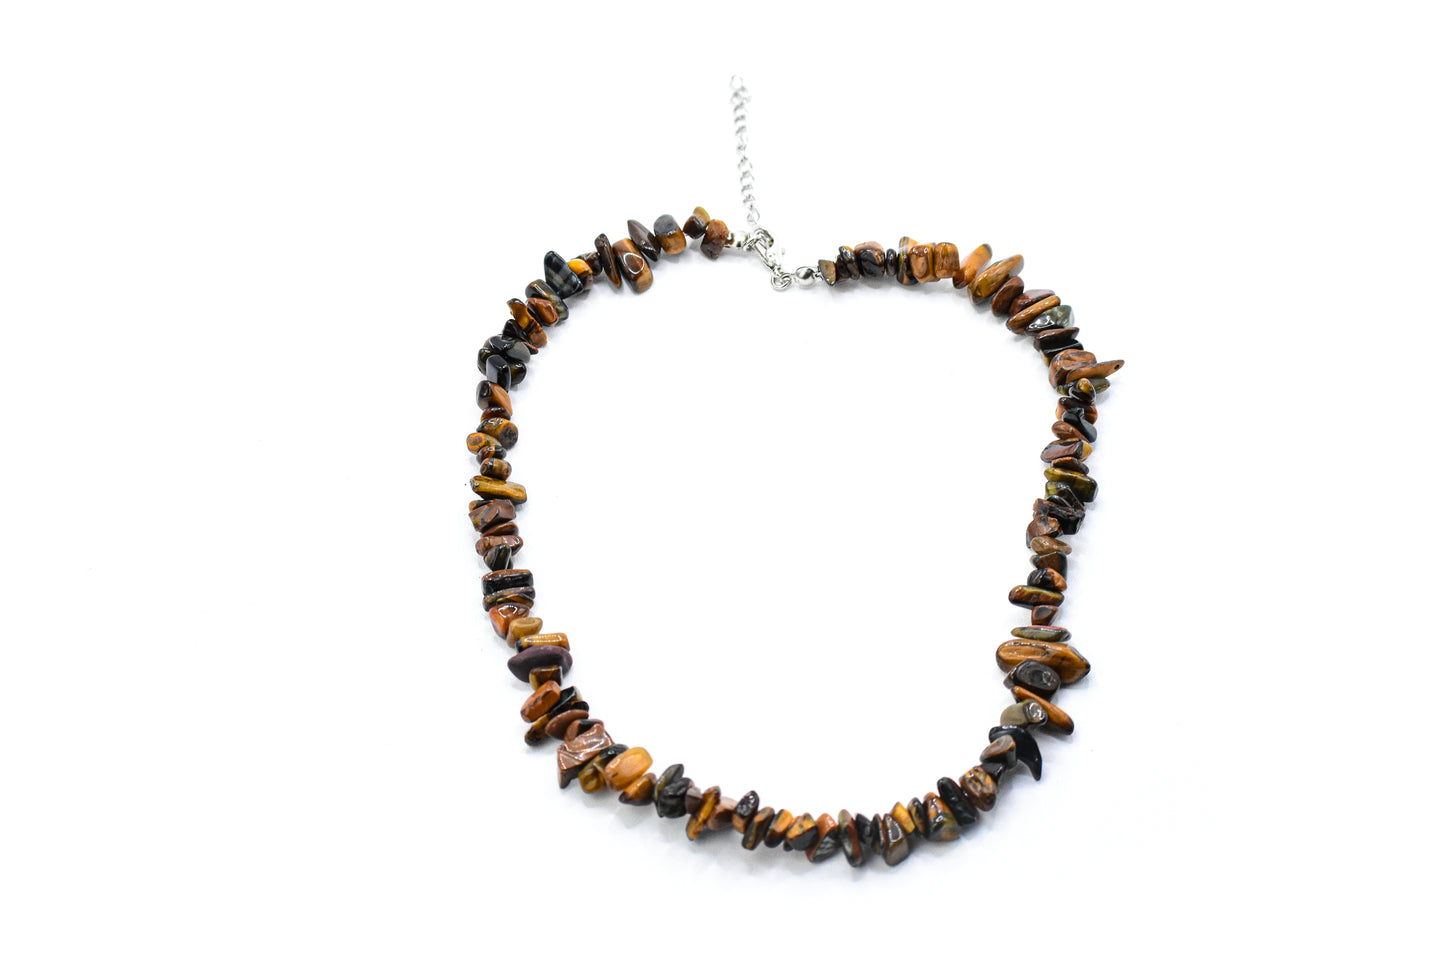 Raw tiger's eye necklace